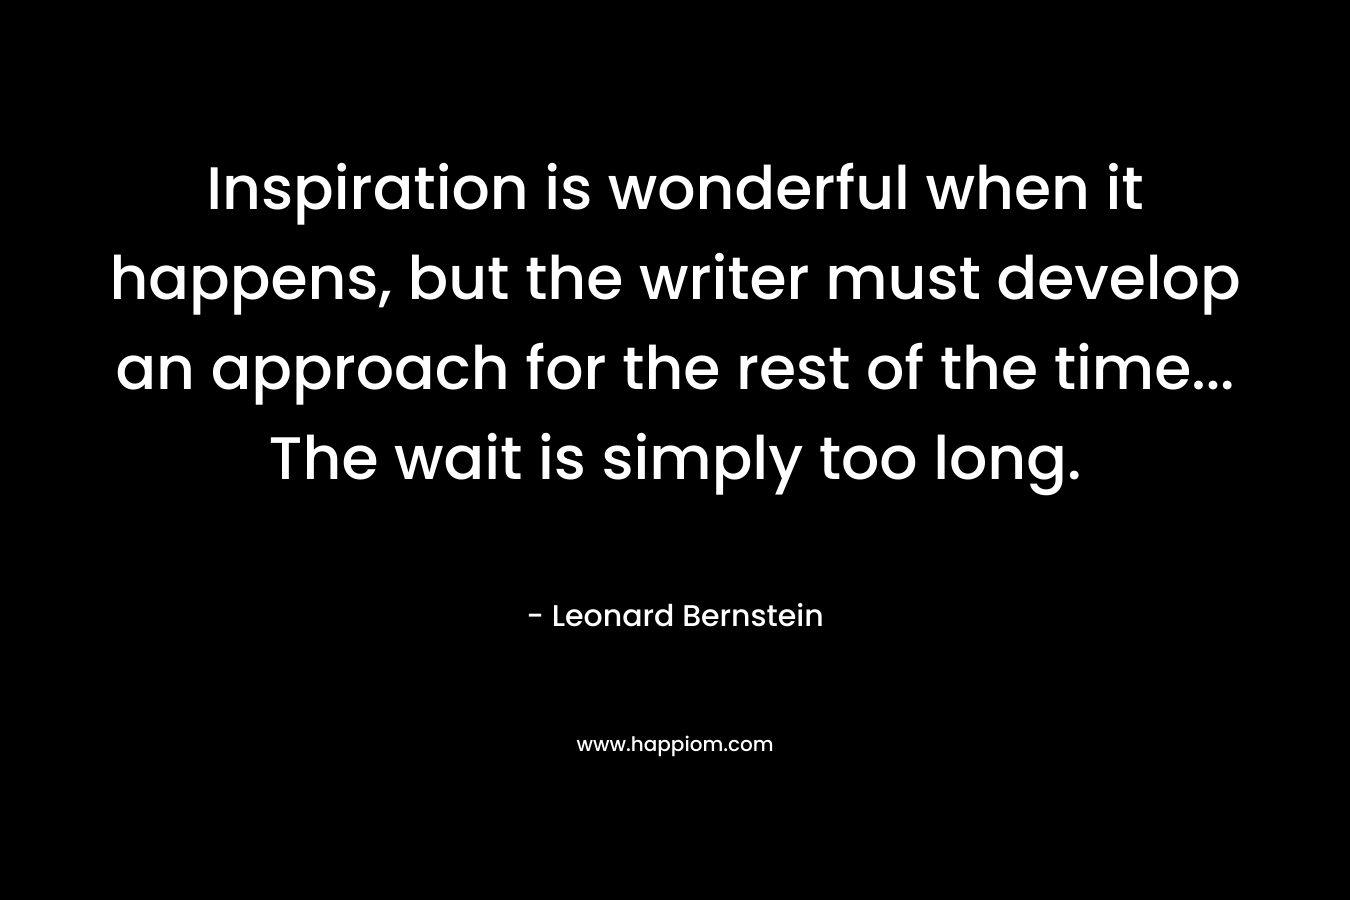 Inspiration is wonderful when it happens, but the writer must develop an approach for the rest of the time… The wait is simply too long. – Leonard Bernstein